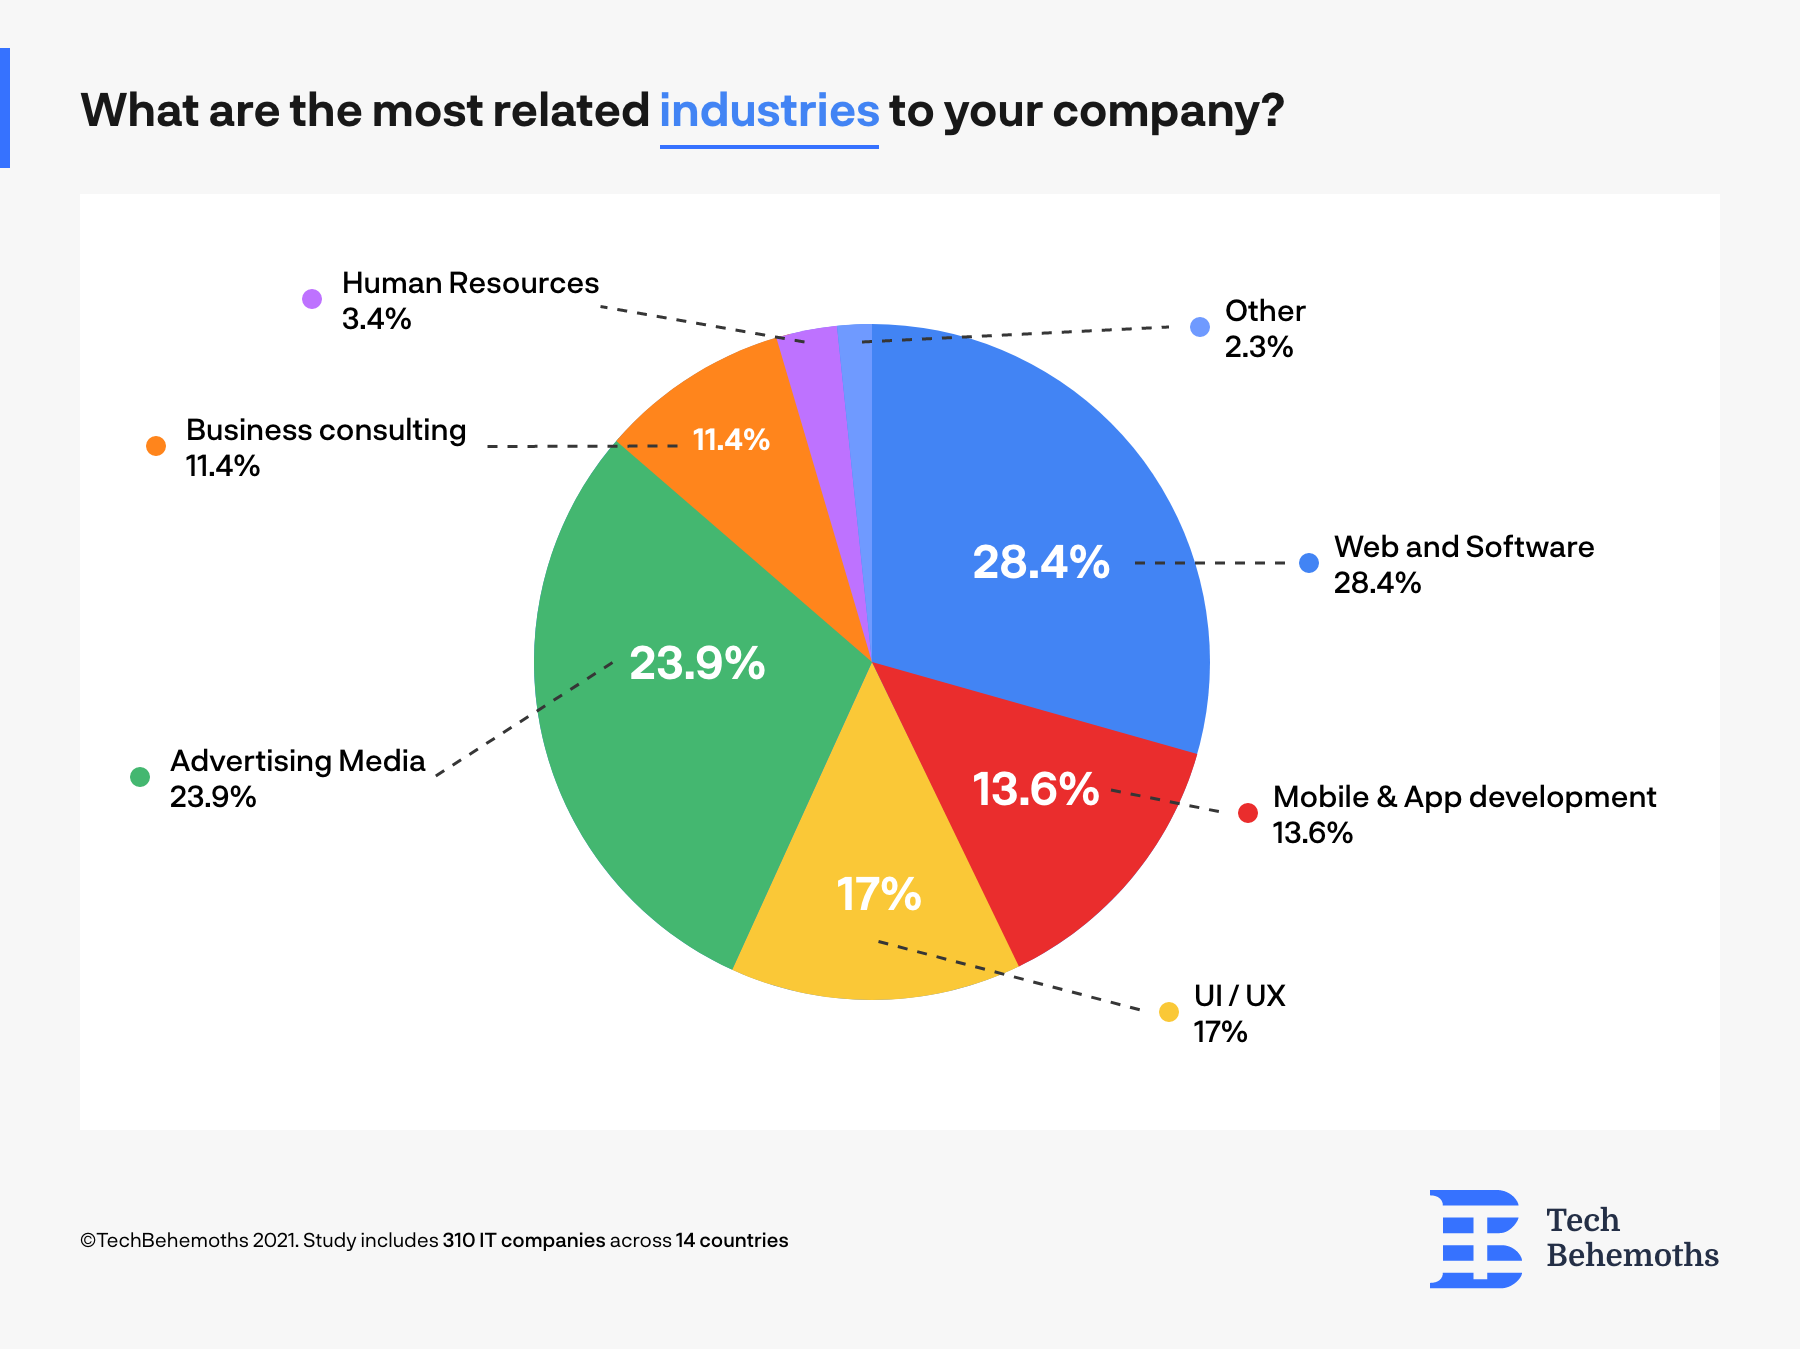 What are most related industries to your company